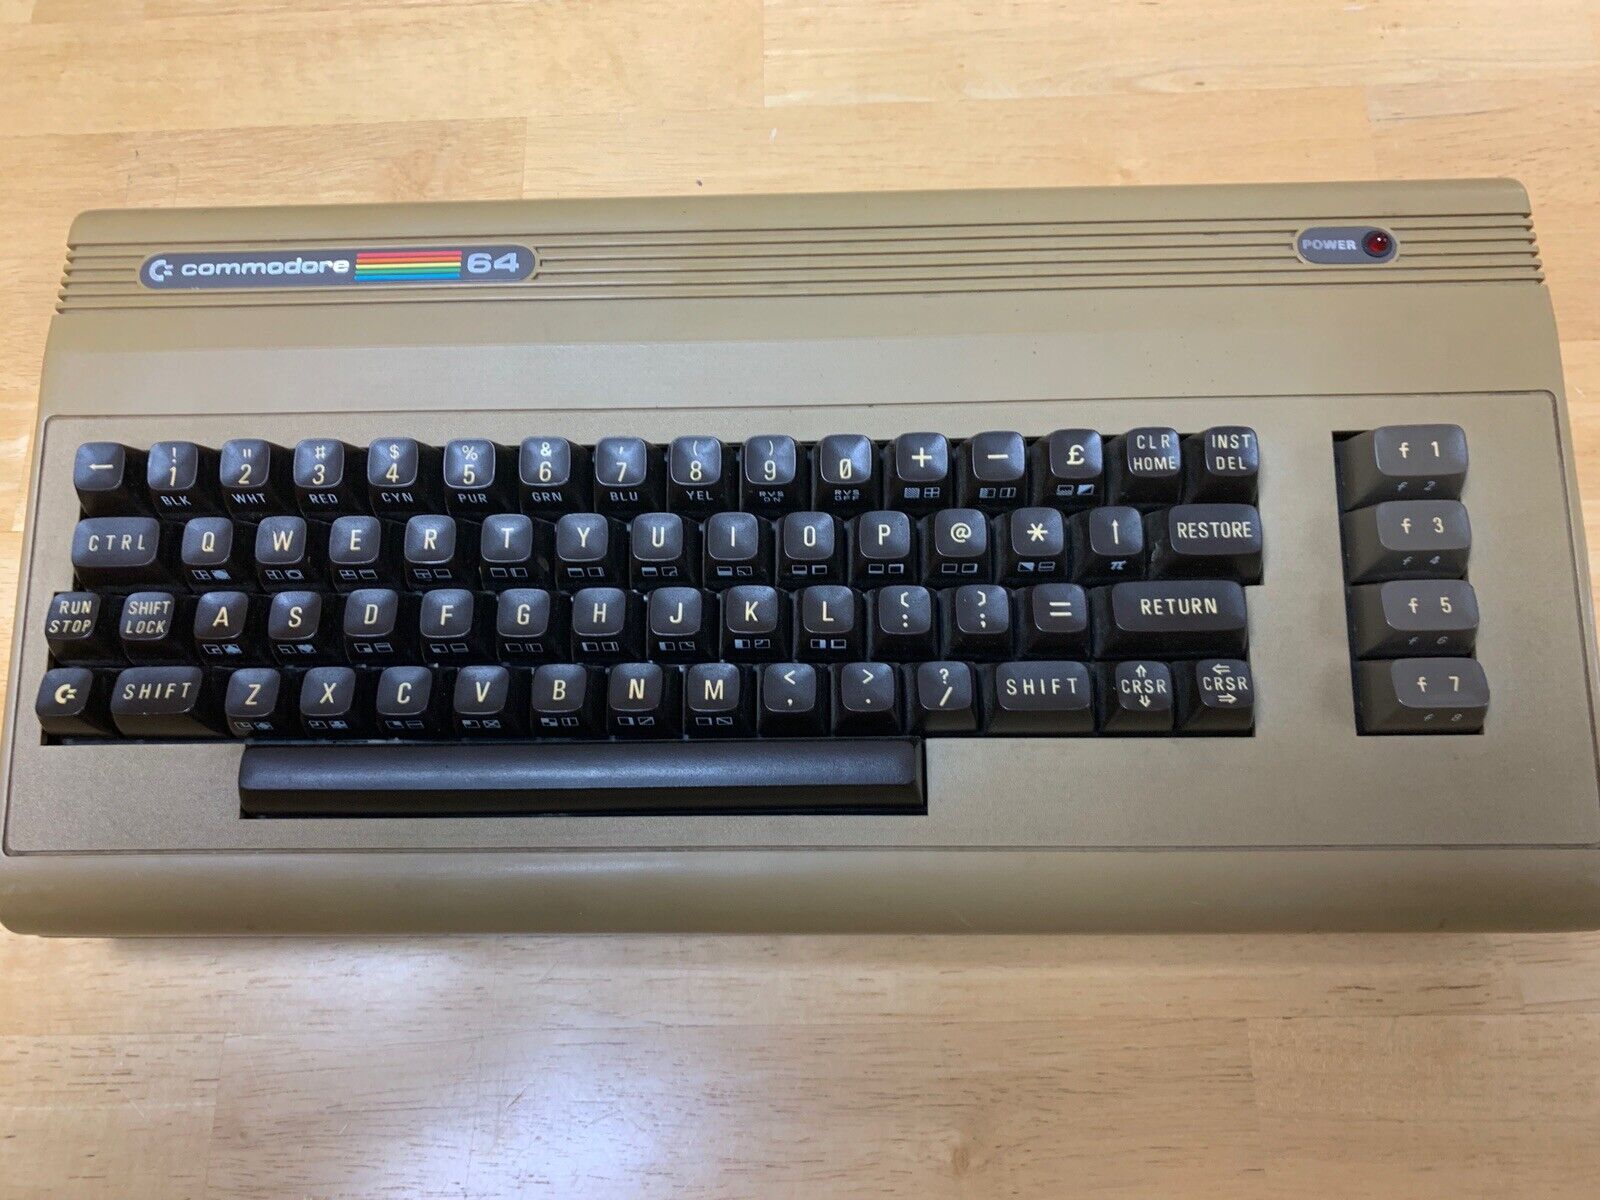 Vintage Commodore 64 C64 Personal Computer - POWERS ON